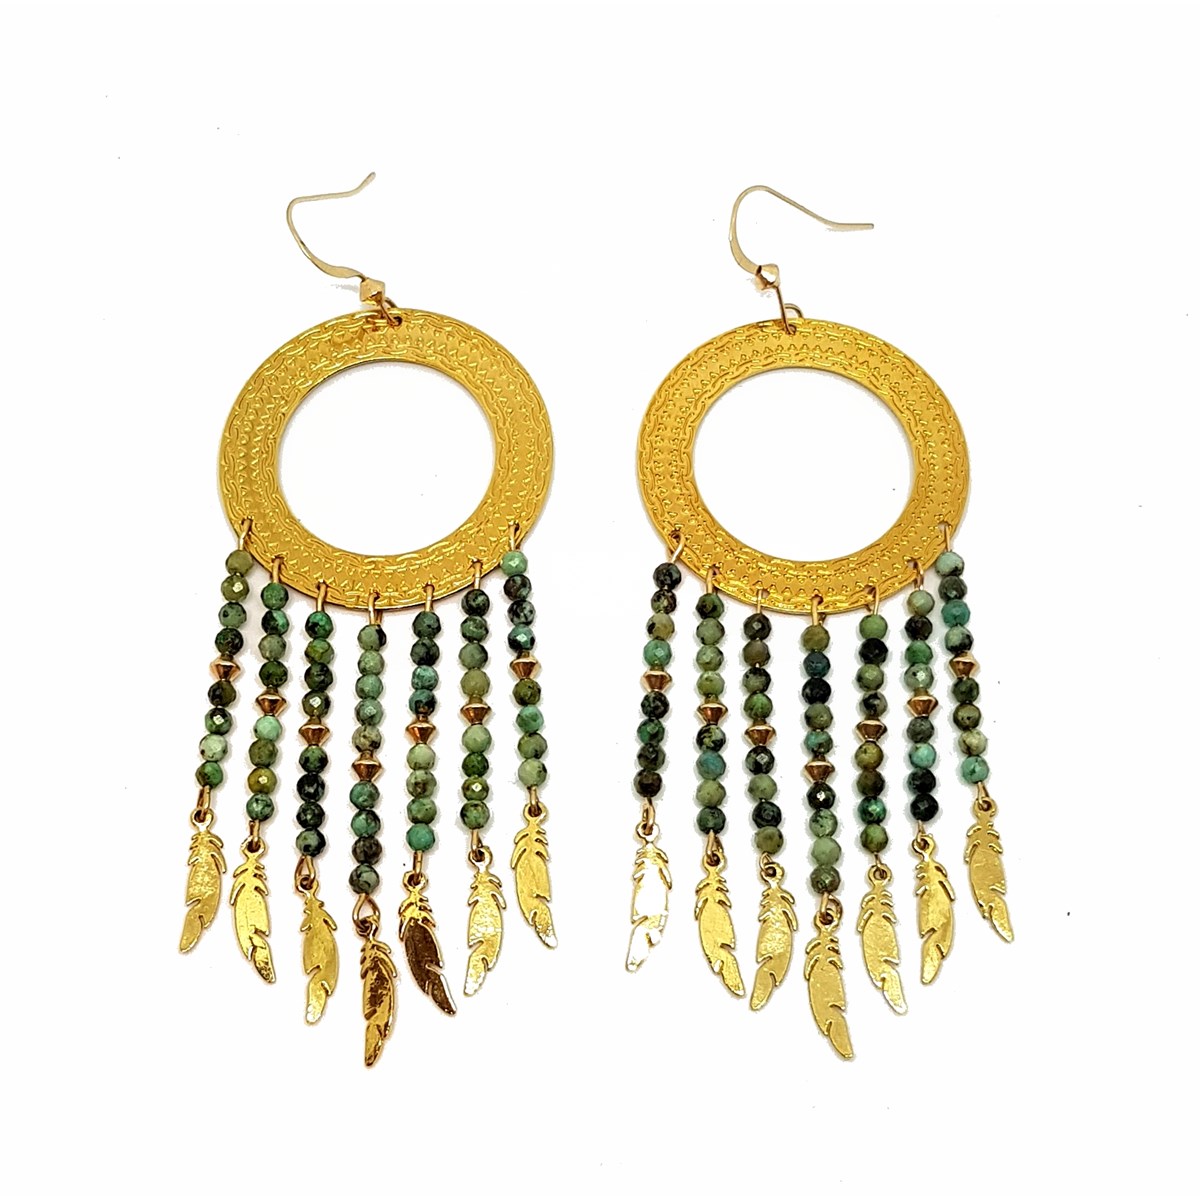 Boucles d'oreilles Indiana Turquoise africaine